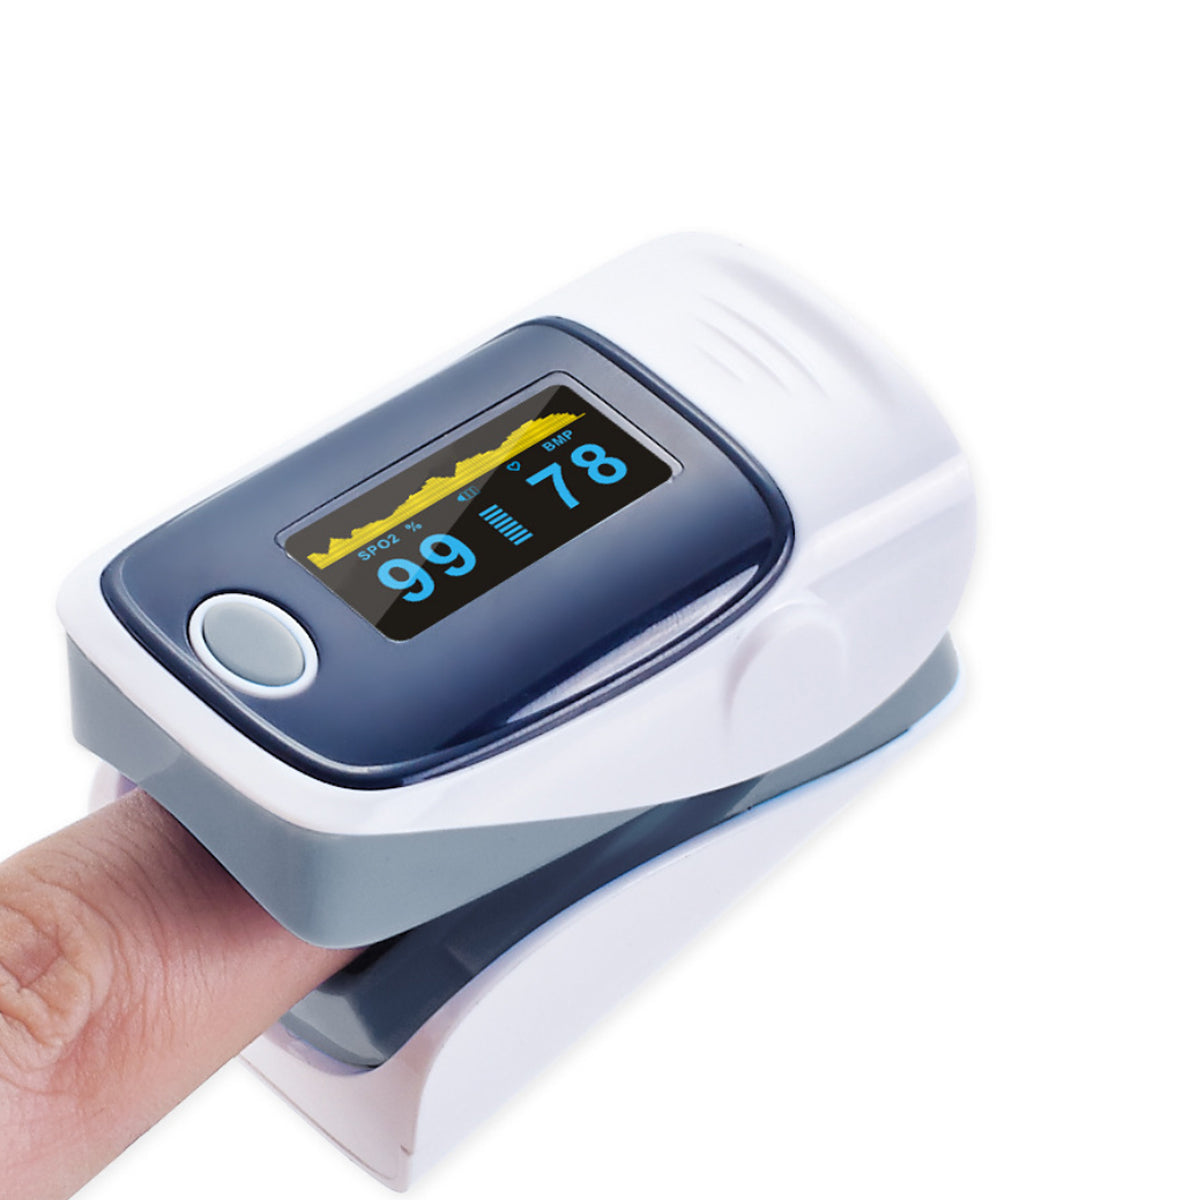  Fingertip Pulse Oximeter And Blood Oxygen Saturation Monitor With LED Display by VistaShops VistaShops Perfumarie